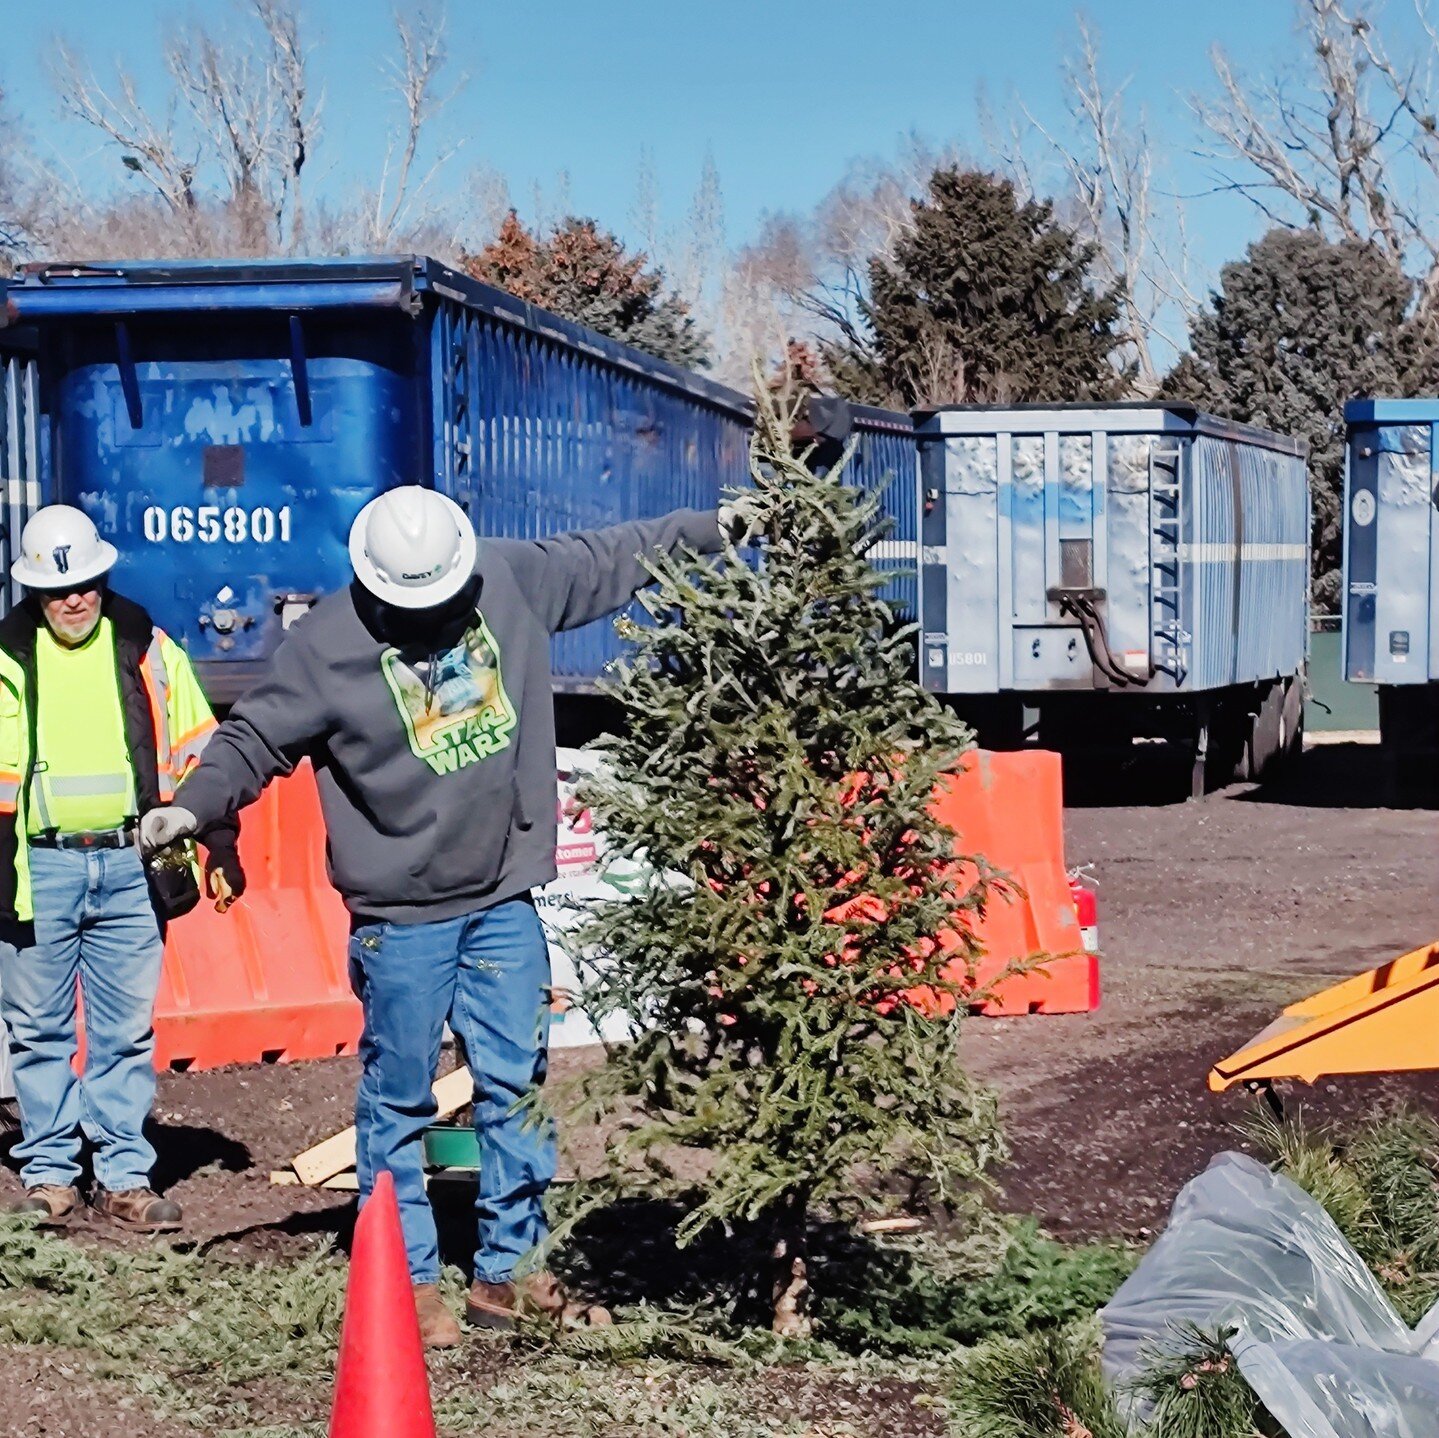 Get ready to say goodbye to your Christmas tree! 🎄👋The last day for Treecycling is on Sunday, Jan 7th. Remember to remove all lights, tinsel, and ornaments before drop off. And don't forget to grab your free mulch on the way out! 🌱 
.
.
.
#OneAlbu